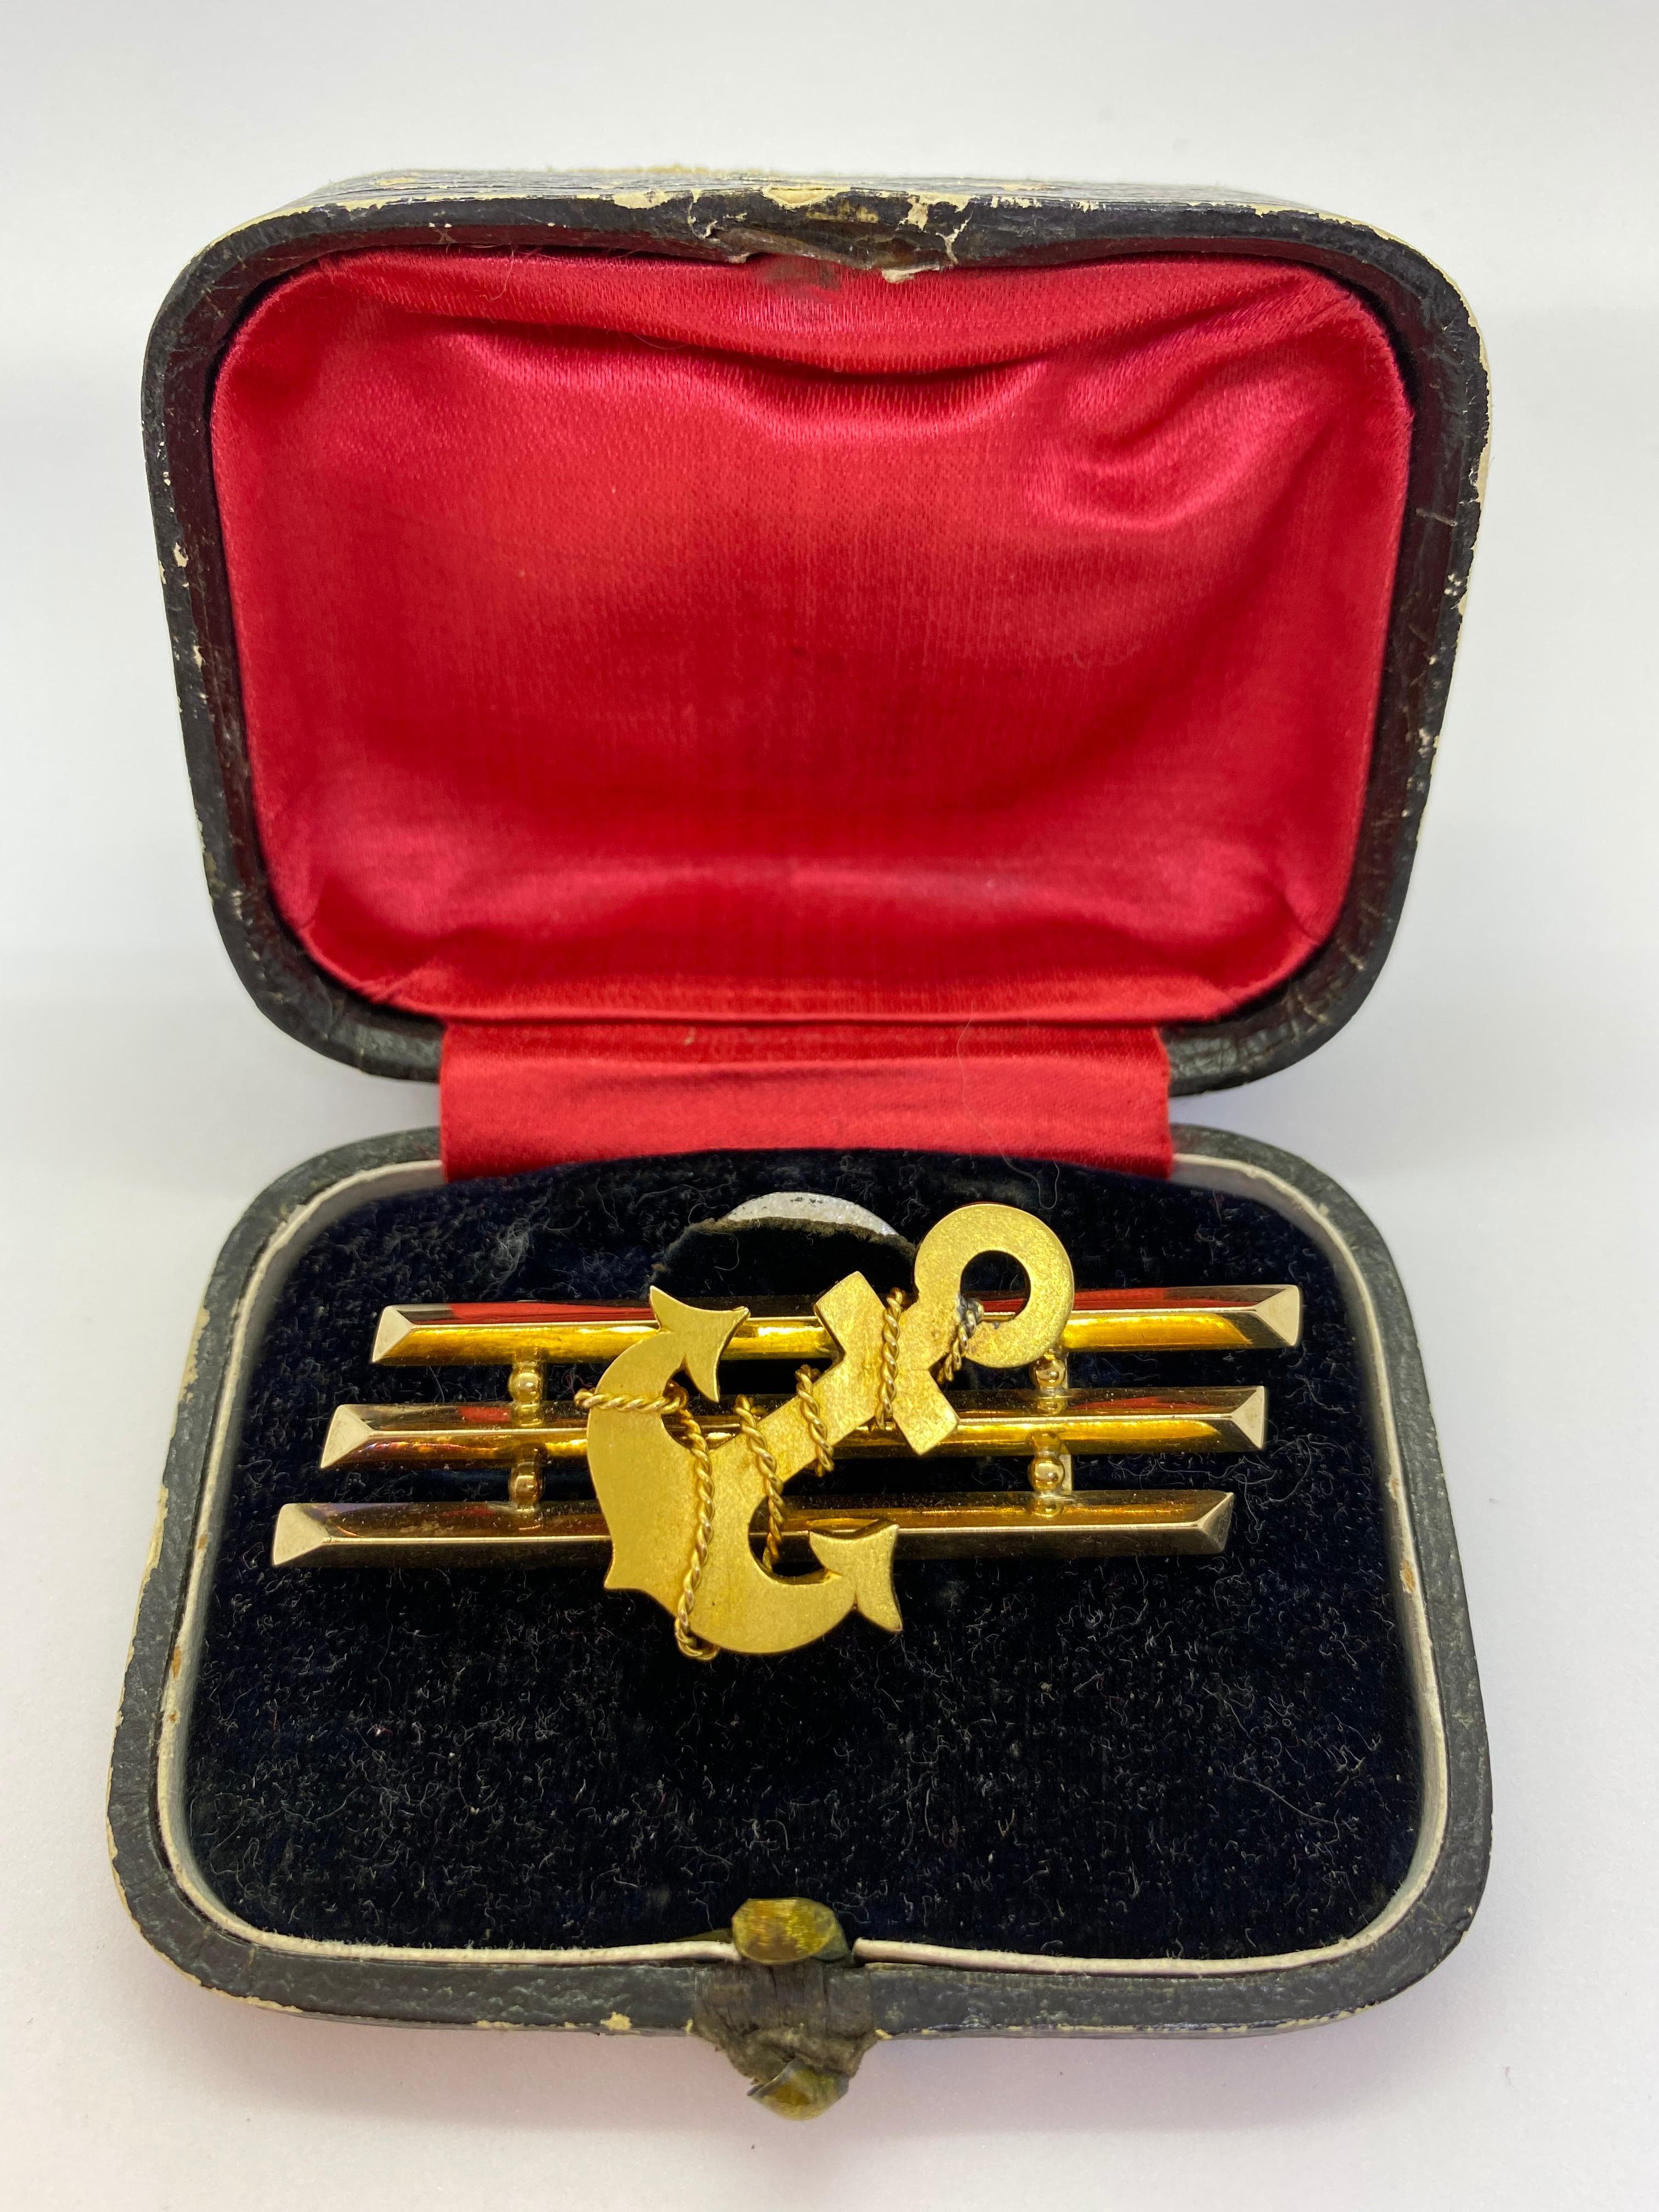 14 Carat Yellow Gold Russia Anchor Brooch For Sale 5